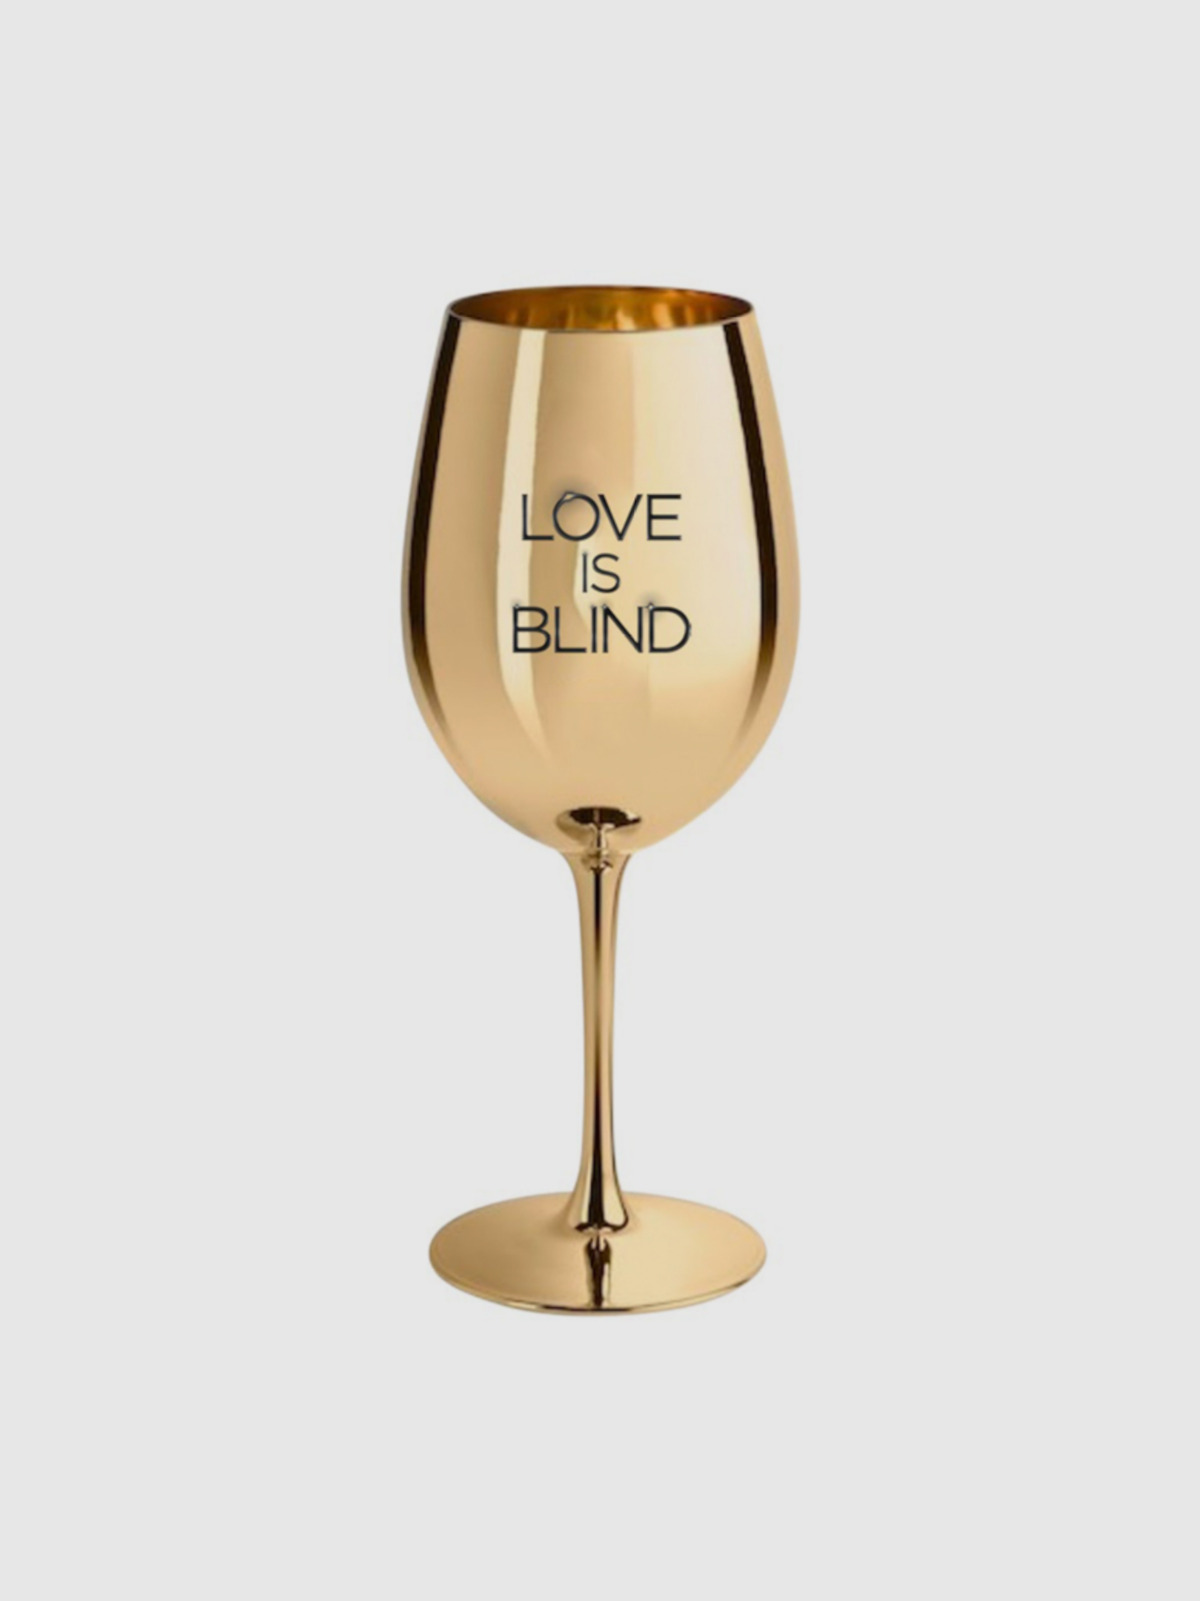 Where To Buy The Love Is Blind Gold Metal Wine Glasses